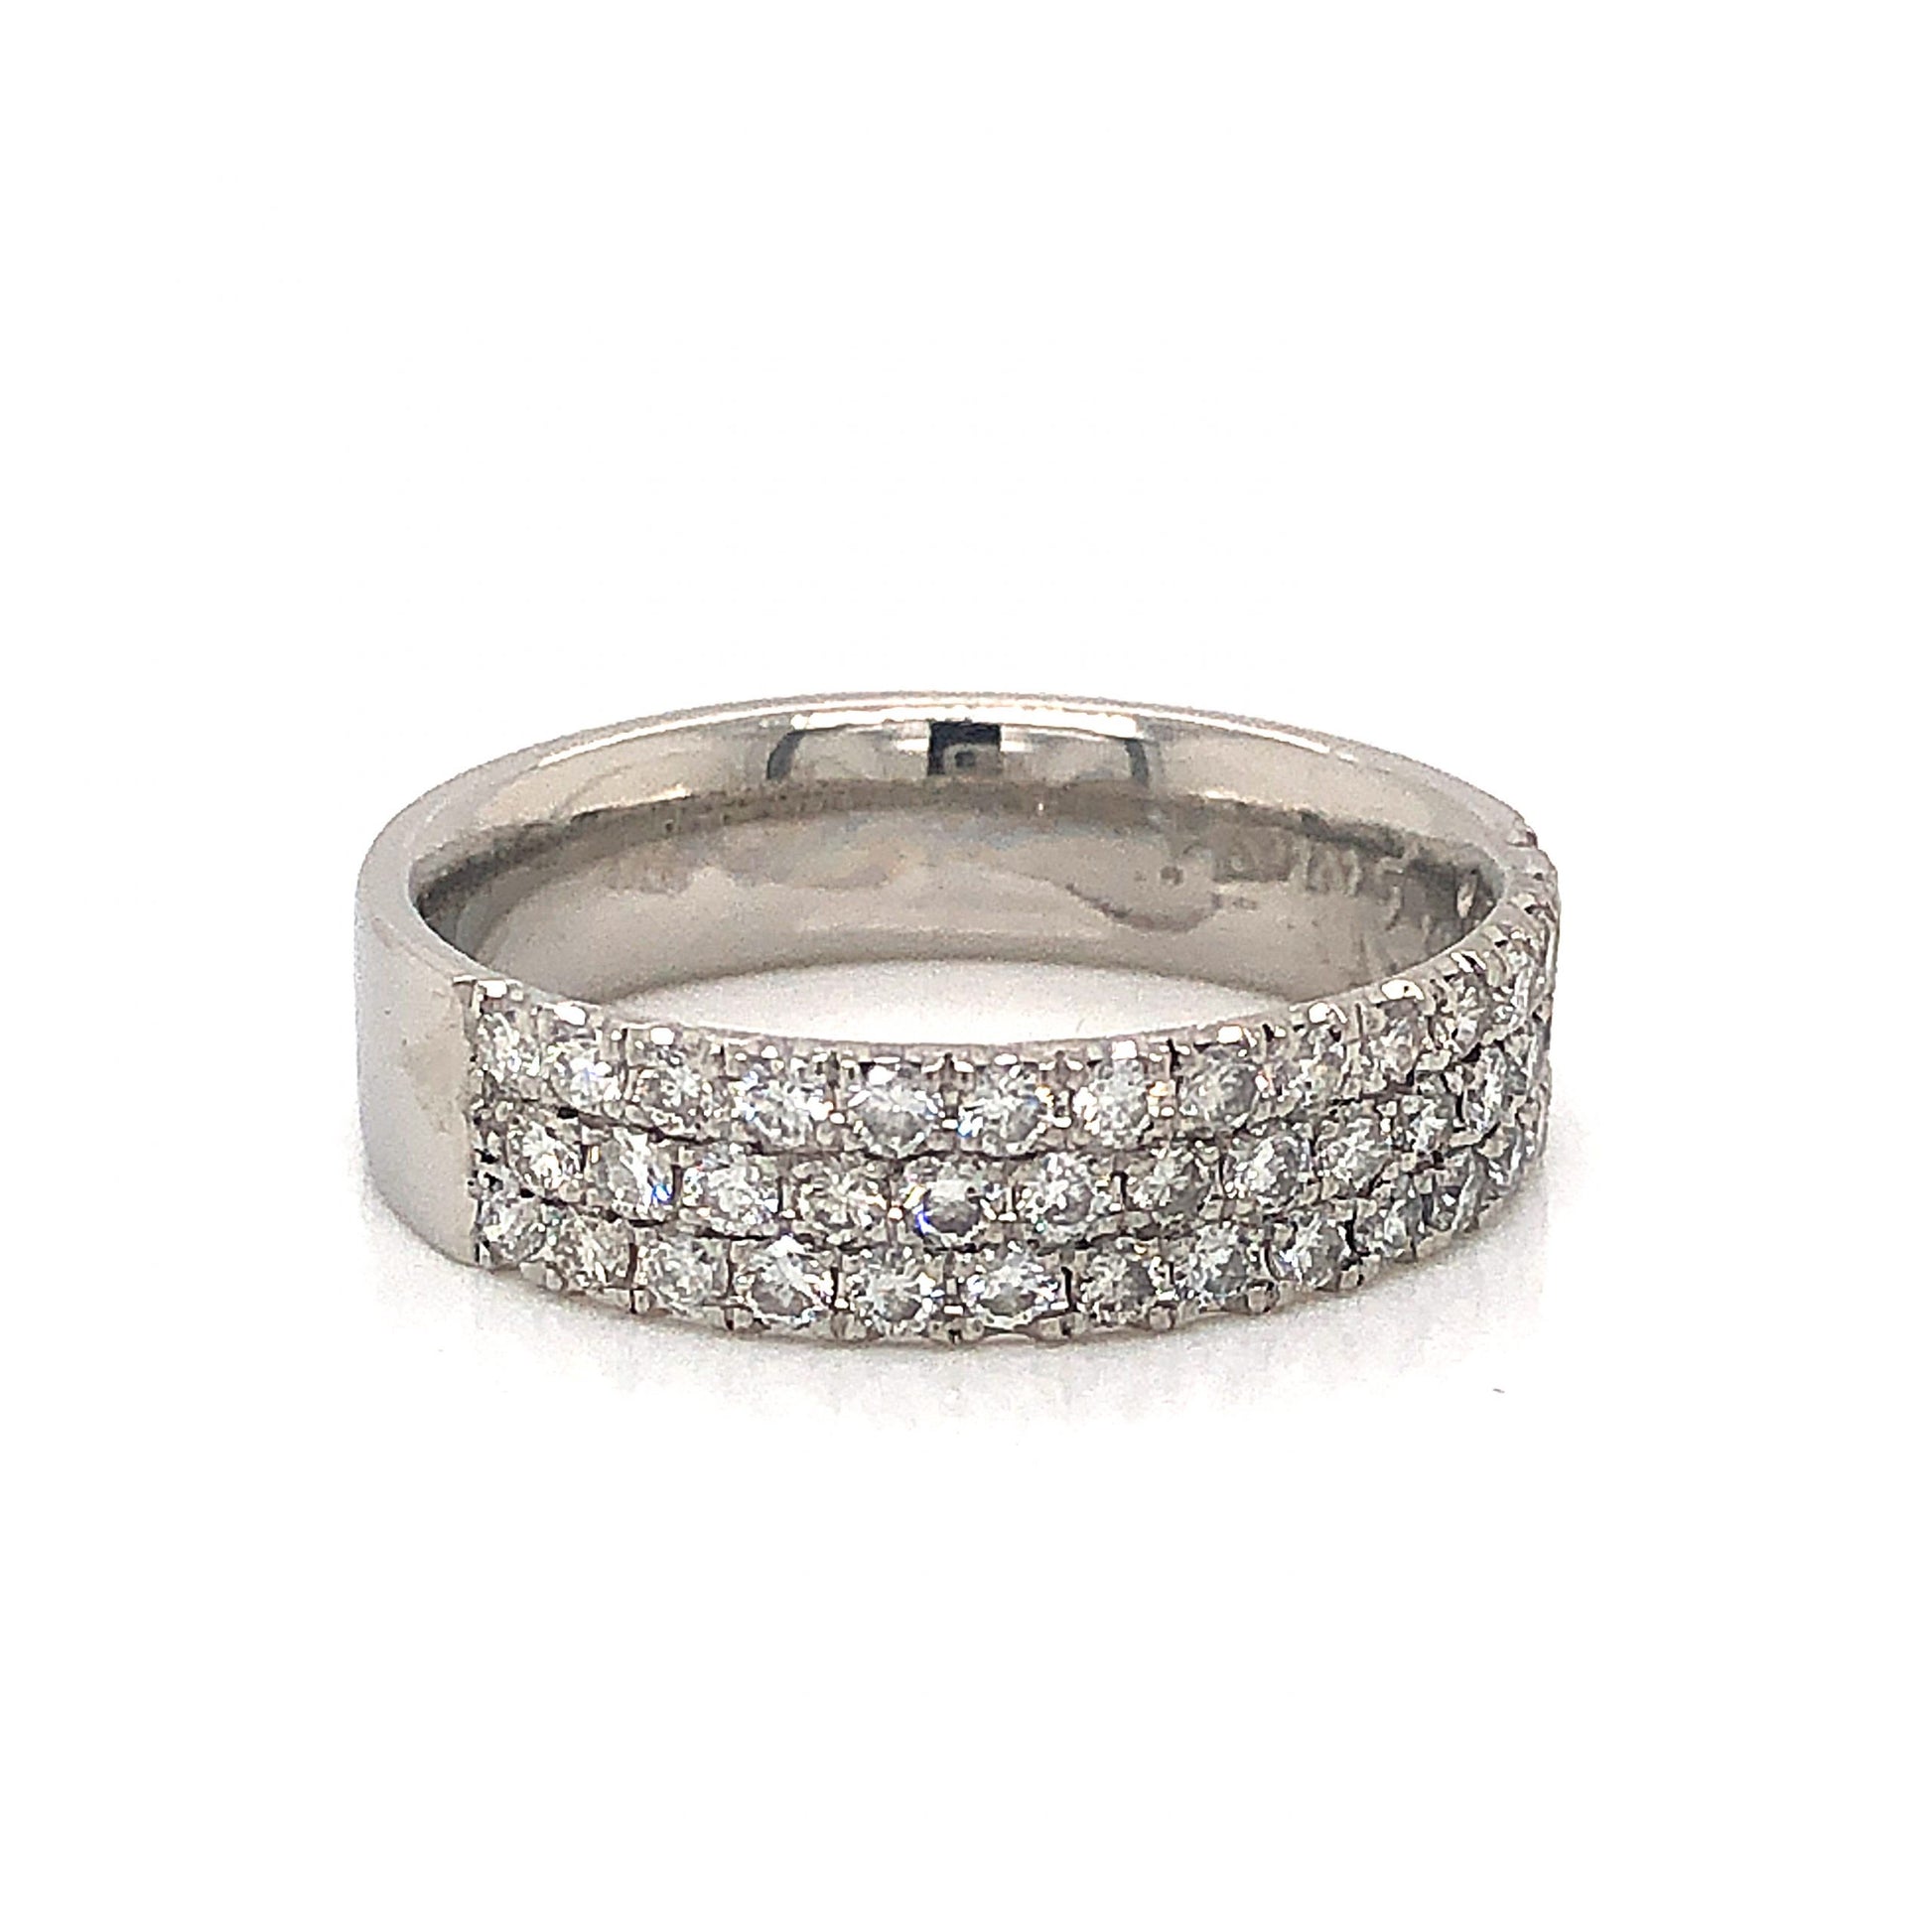 5mm Pave Diamond Stacking Band in PlatinumComposition: PlatinumRing Size: 7Total Diamond Weight: .66 ctTotal Gram Weight: 7.0 gInscription: PLAT m Sarosi